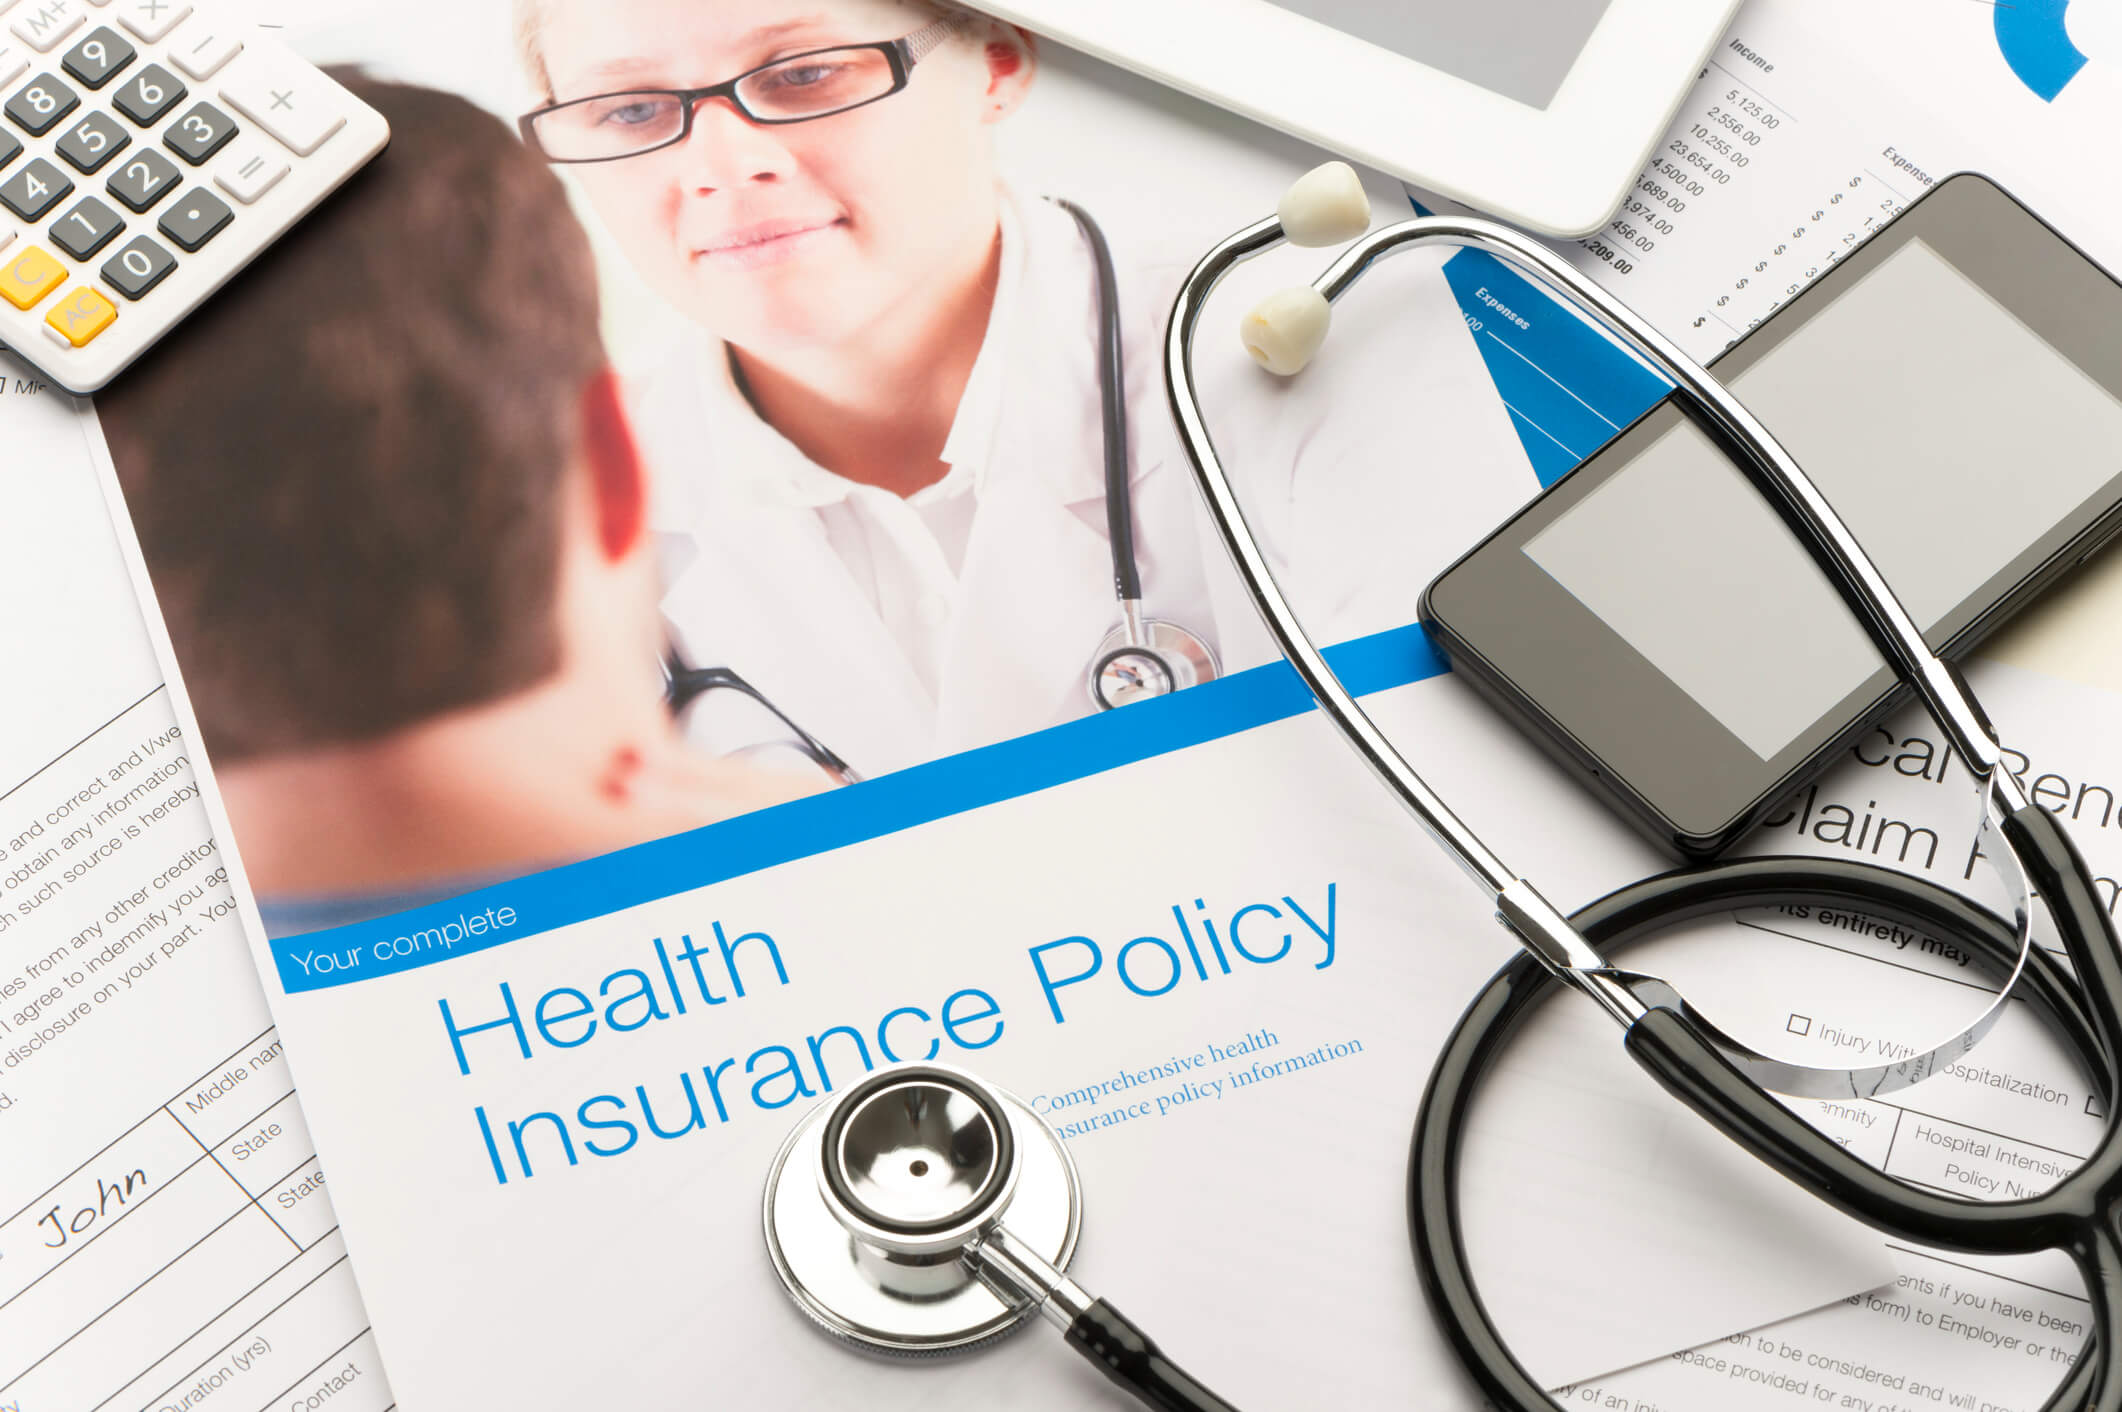 Health Insurance Policy brochure with paperwork, a stethoscope, mobile phone and digital tablet